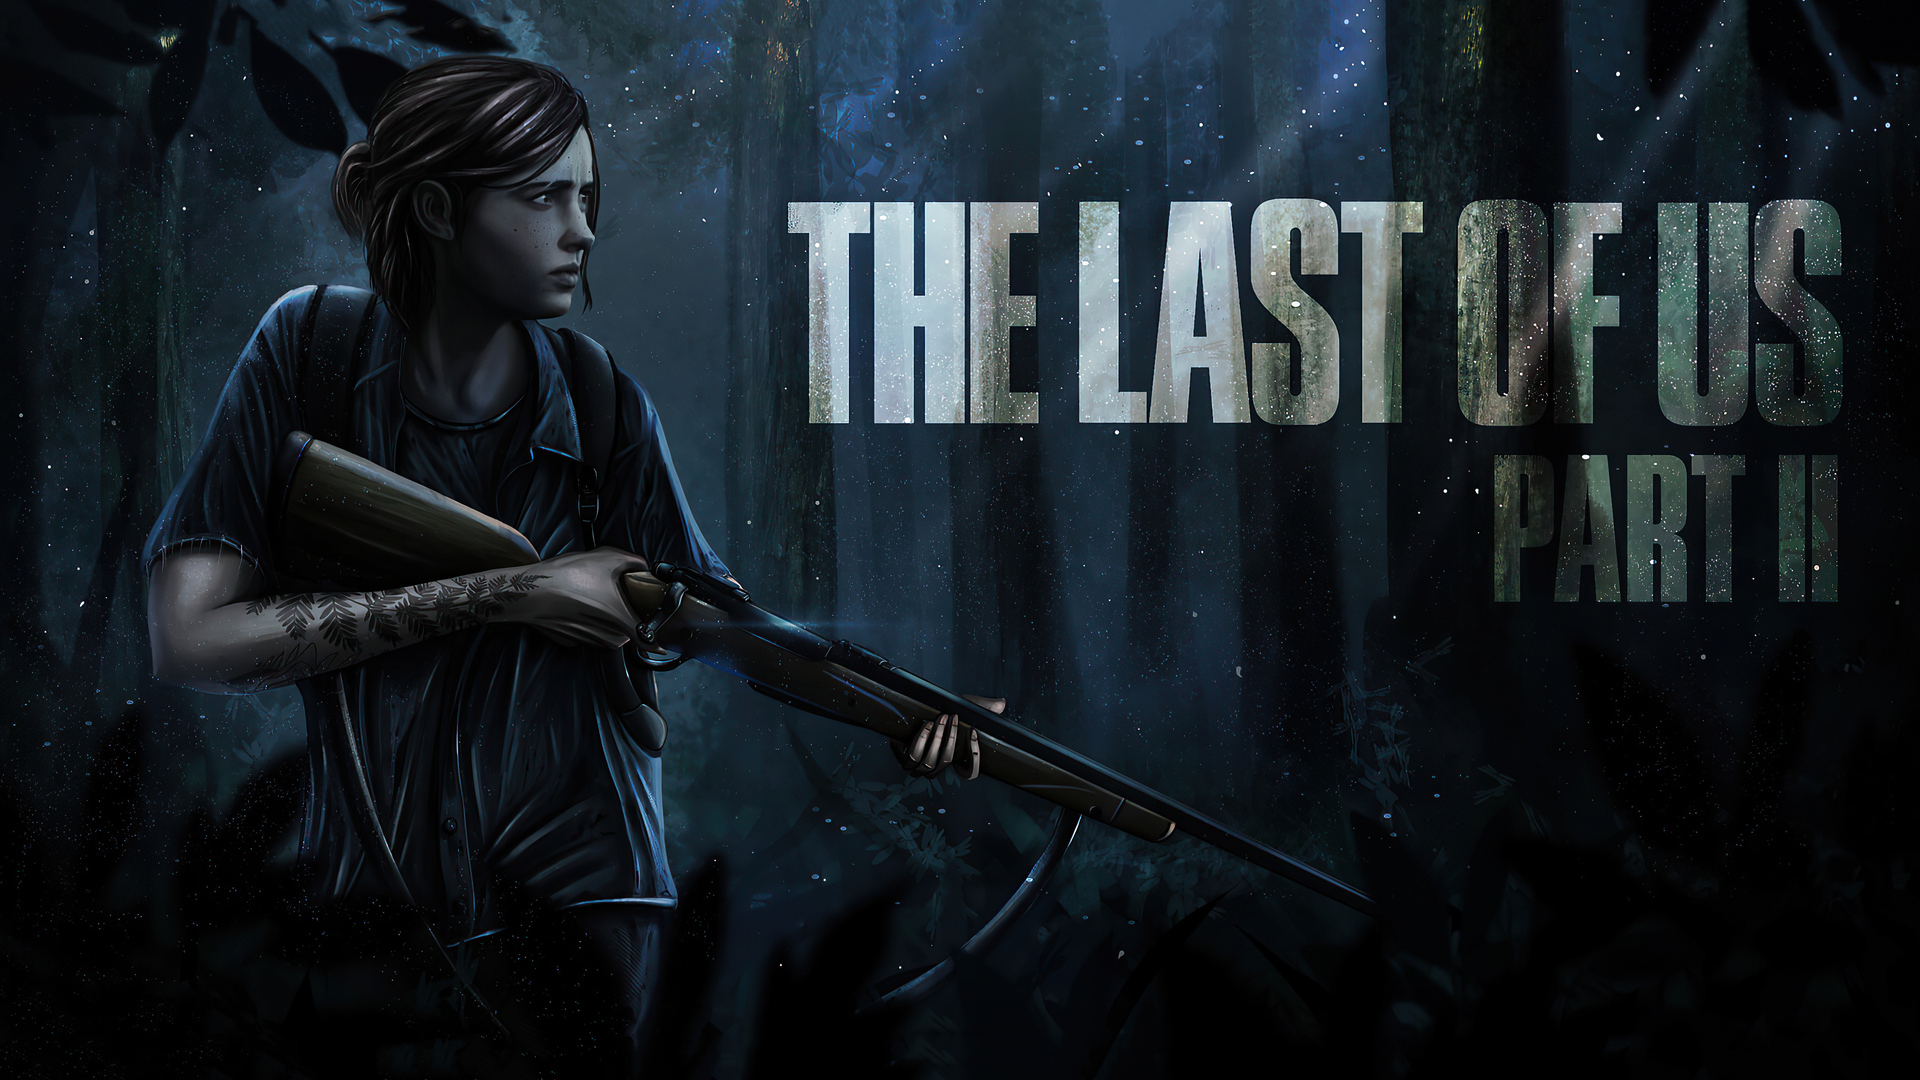 19x1080 The Last Of Us Part Ii 4k Artwork Laptop Full Hd 1080p Hd 4k Wallpapers Images Backgrounds Photos And Pictures